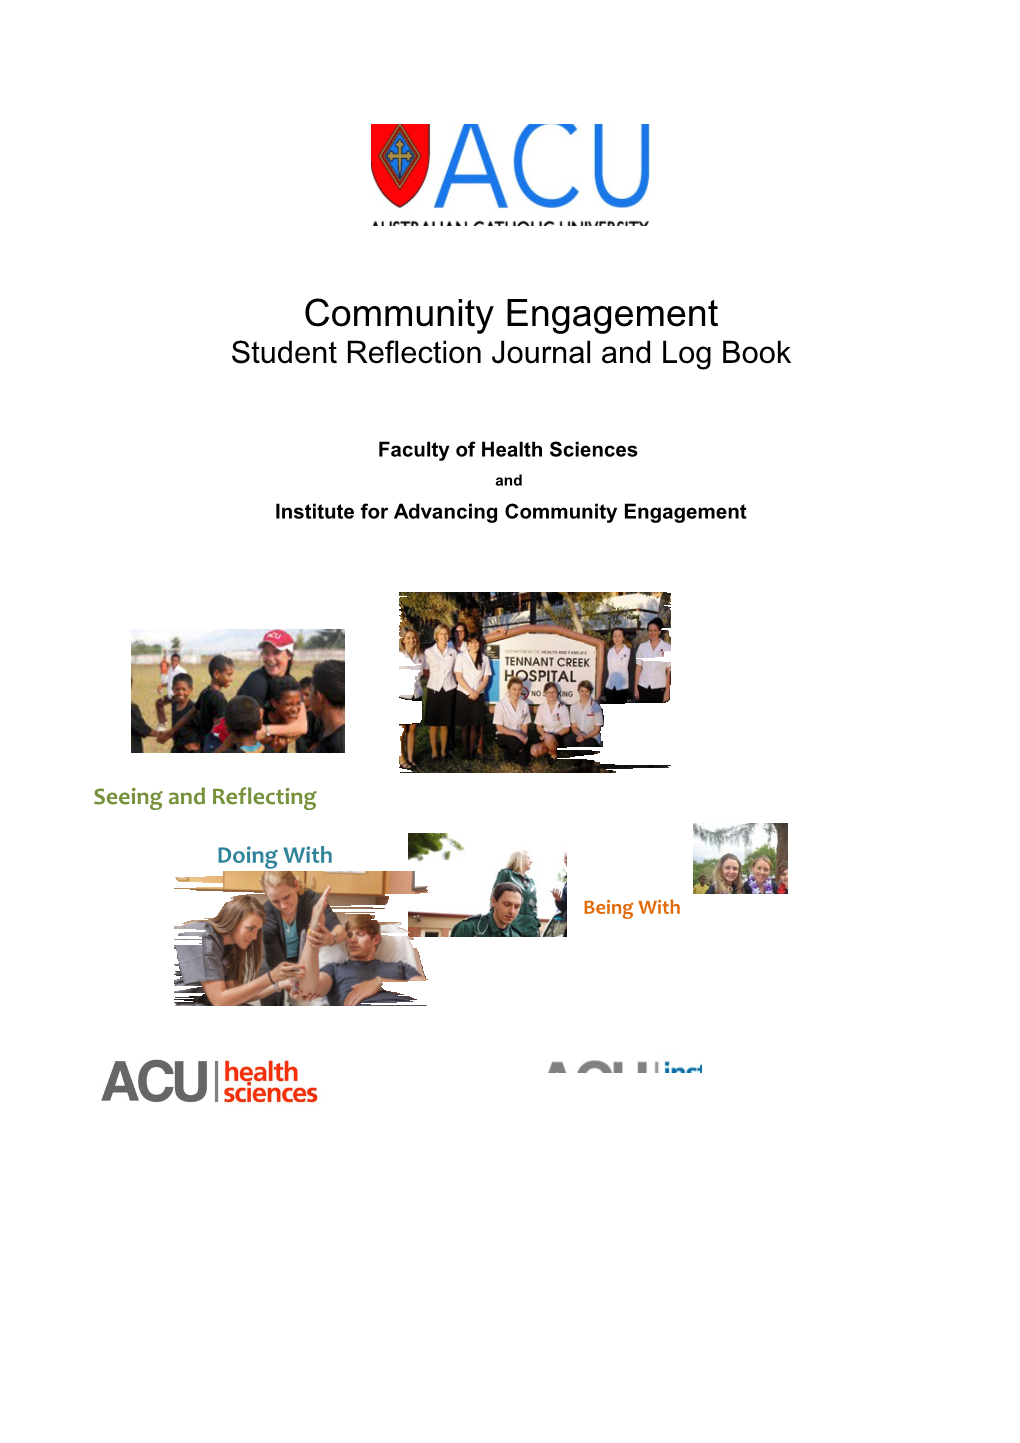 Institute for Advancing Community Engagement